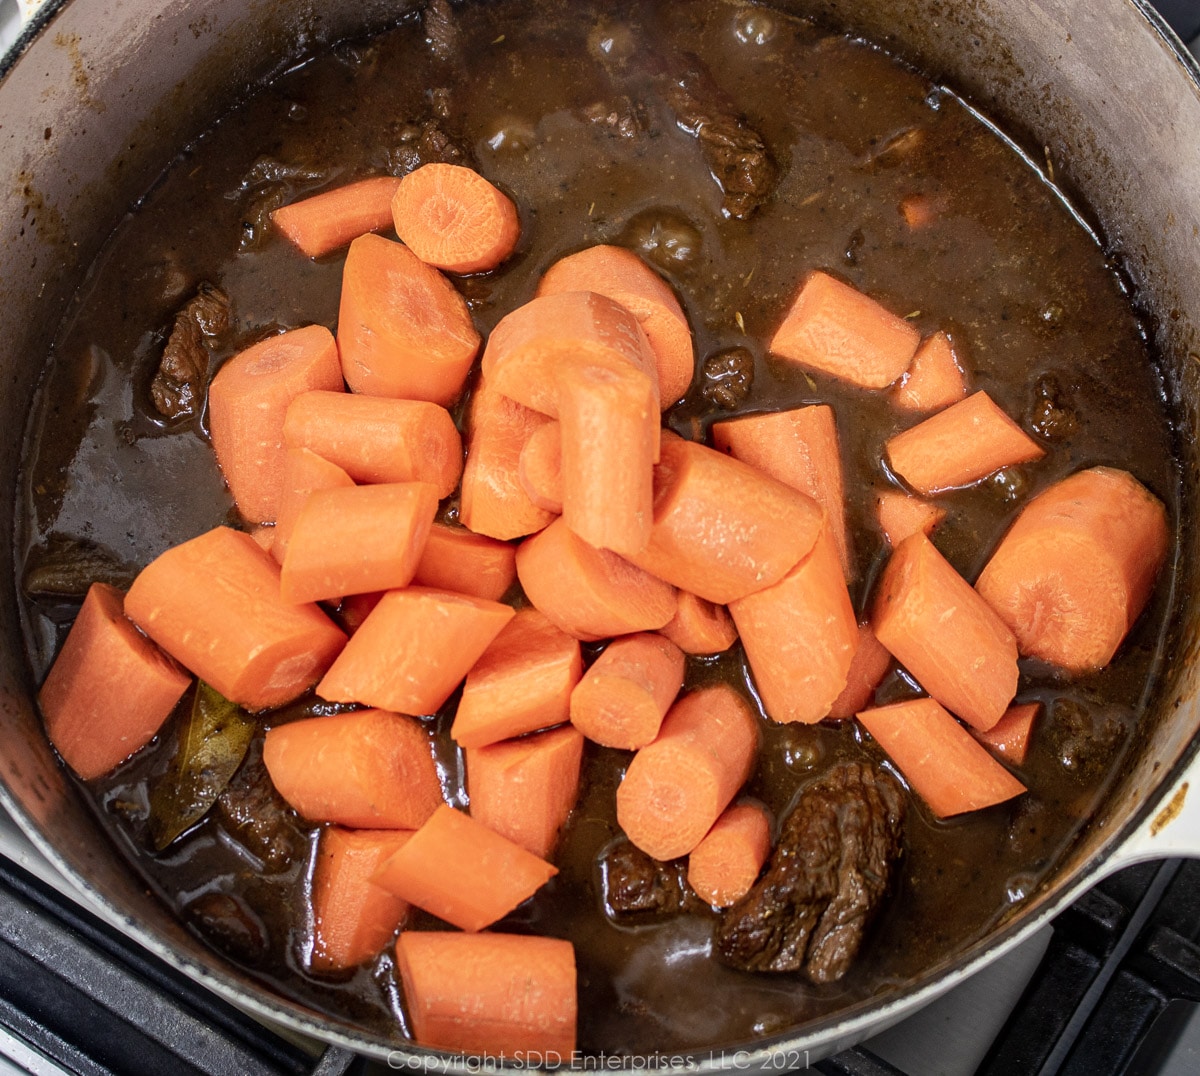 carrots are added to beef and stock in a Dutch oven